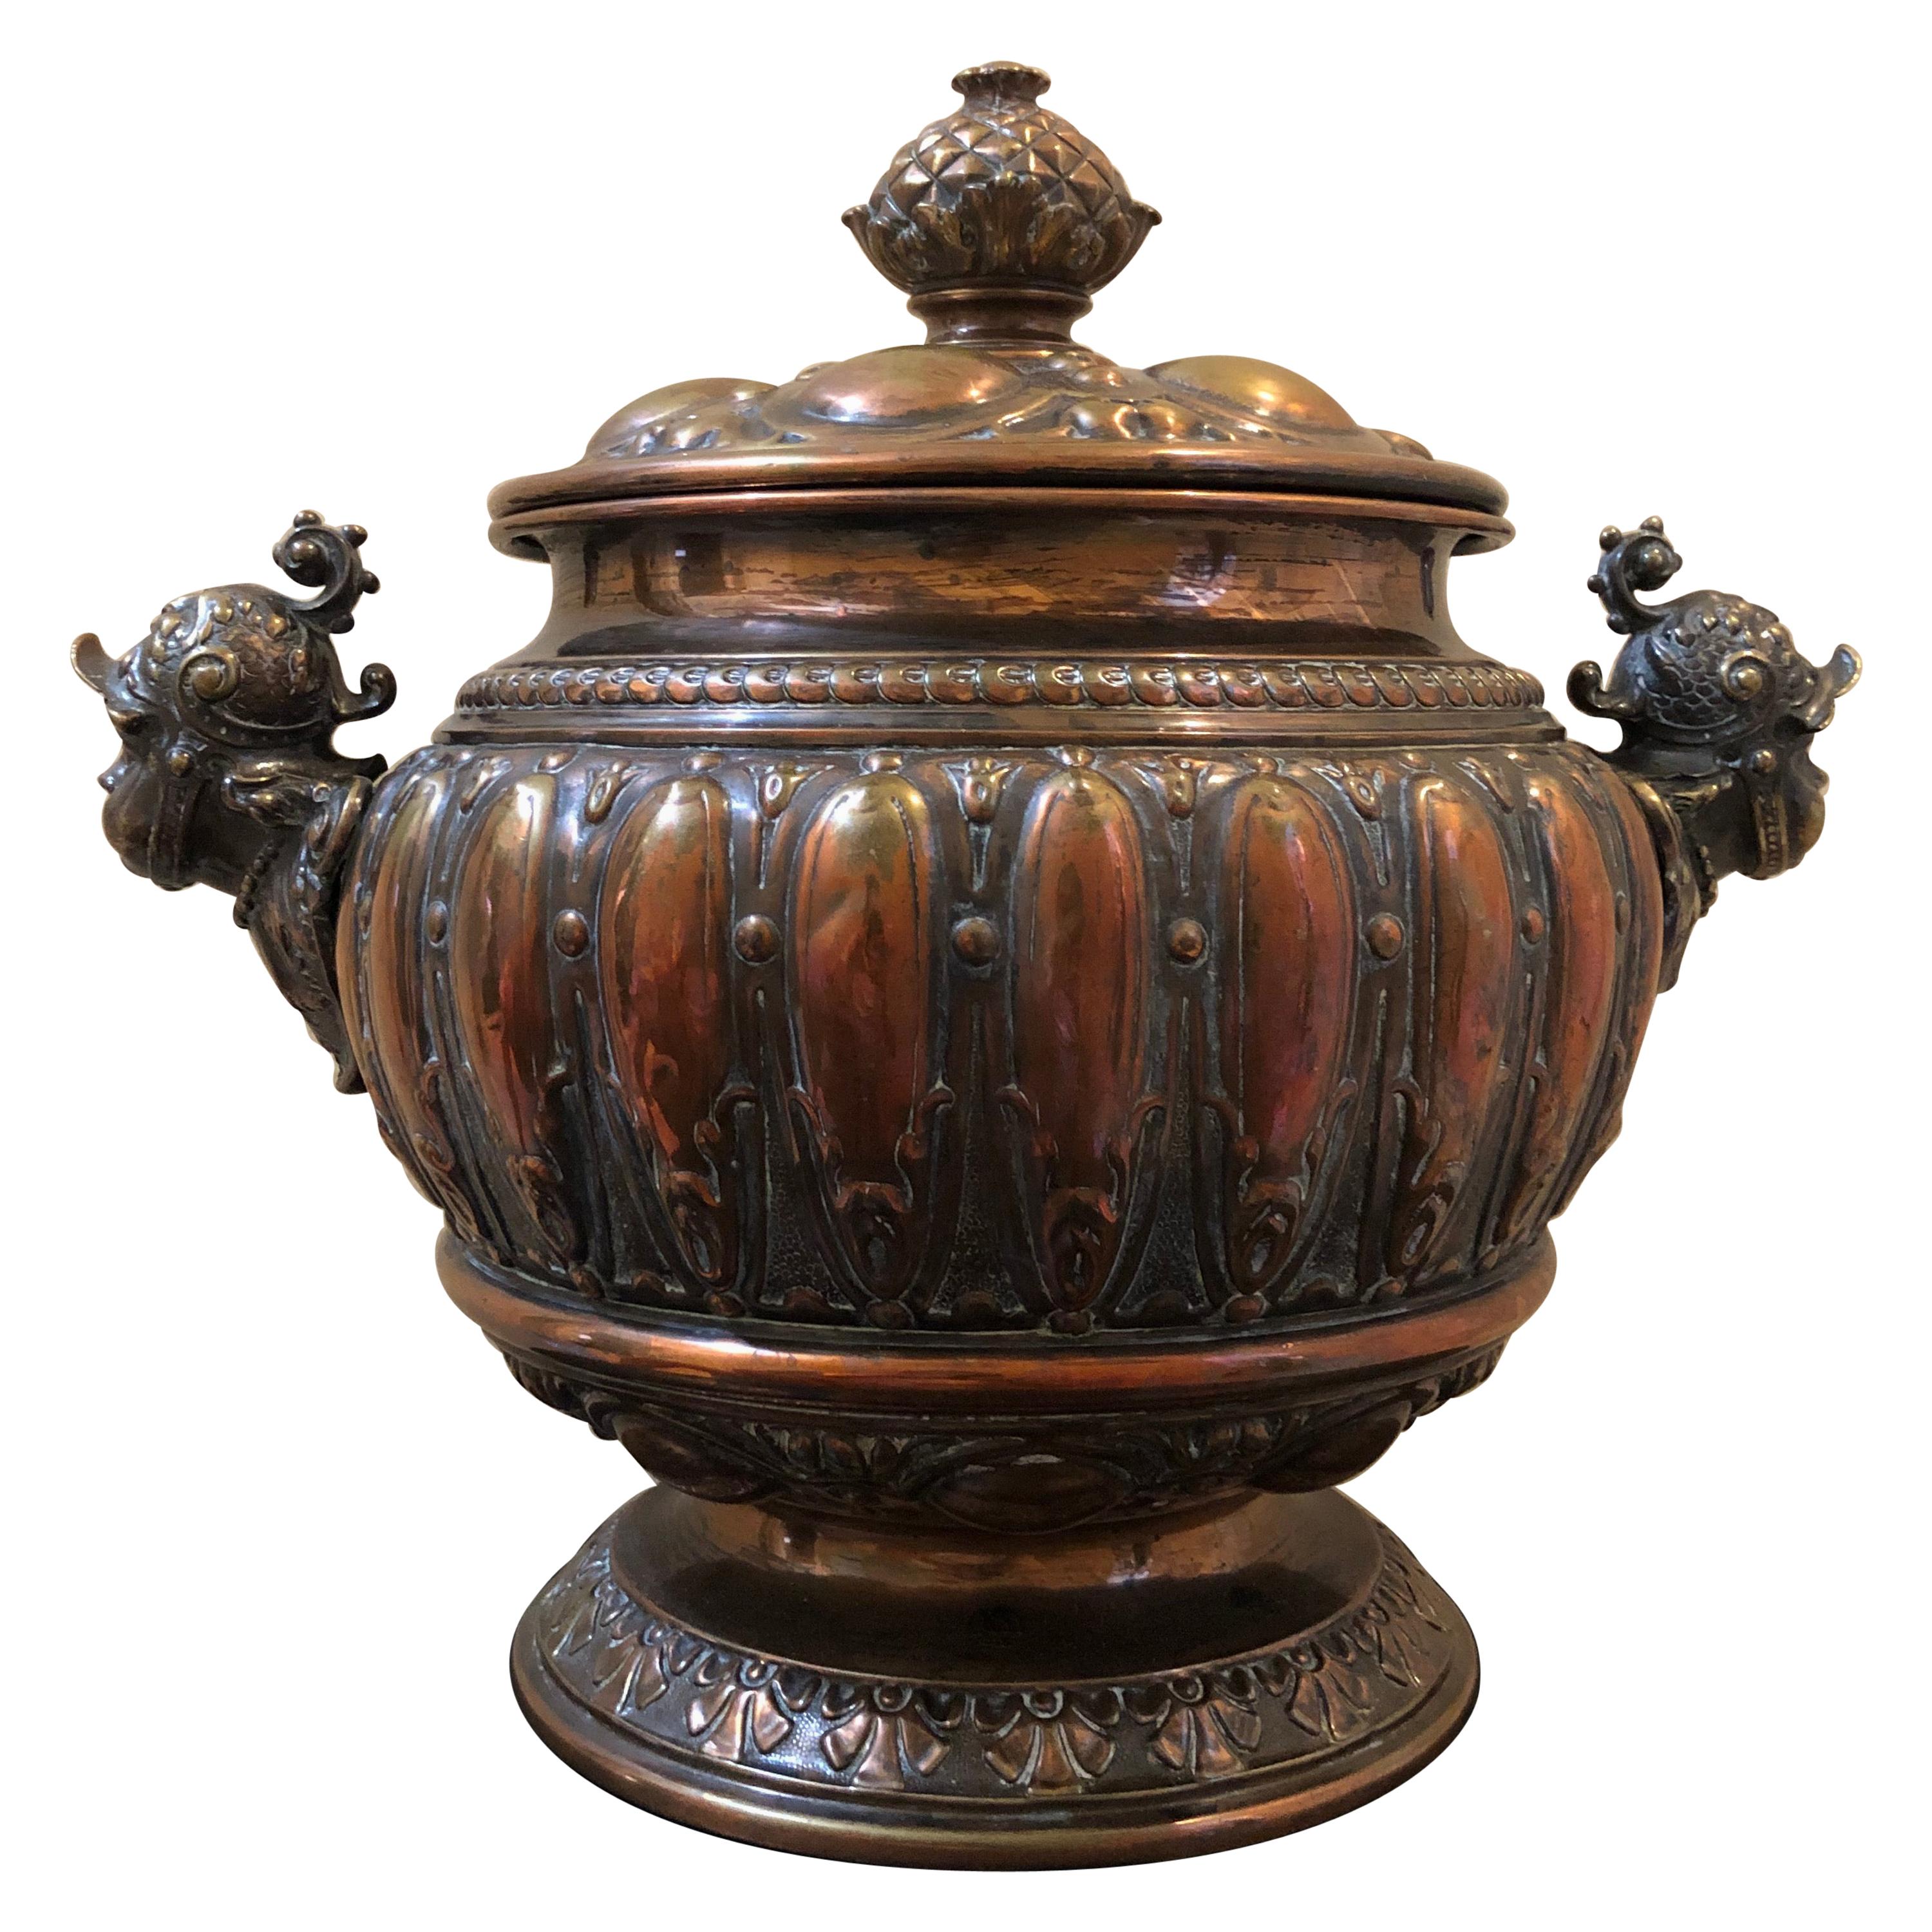 European 18th or Early 19th Century Repousse Copper Tureen